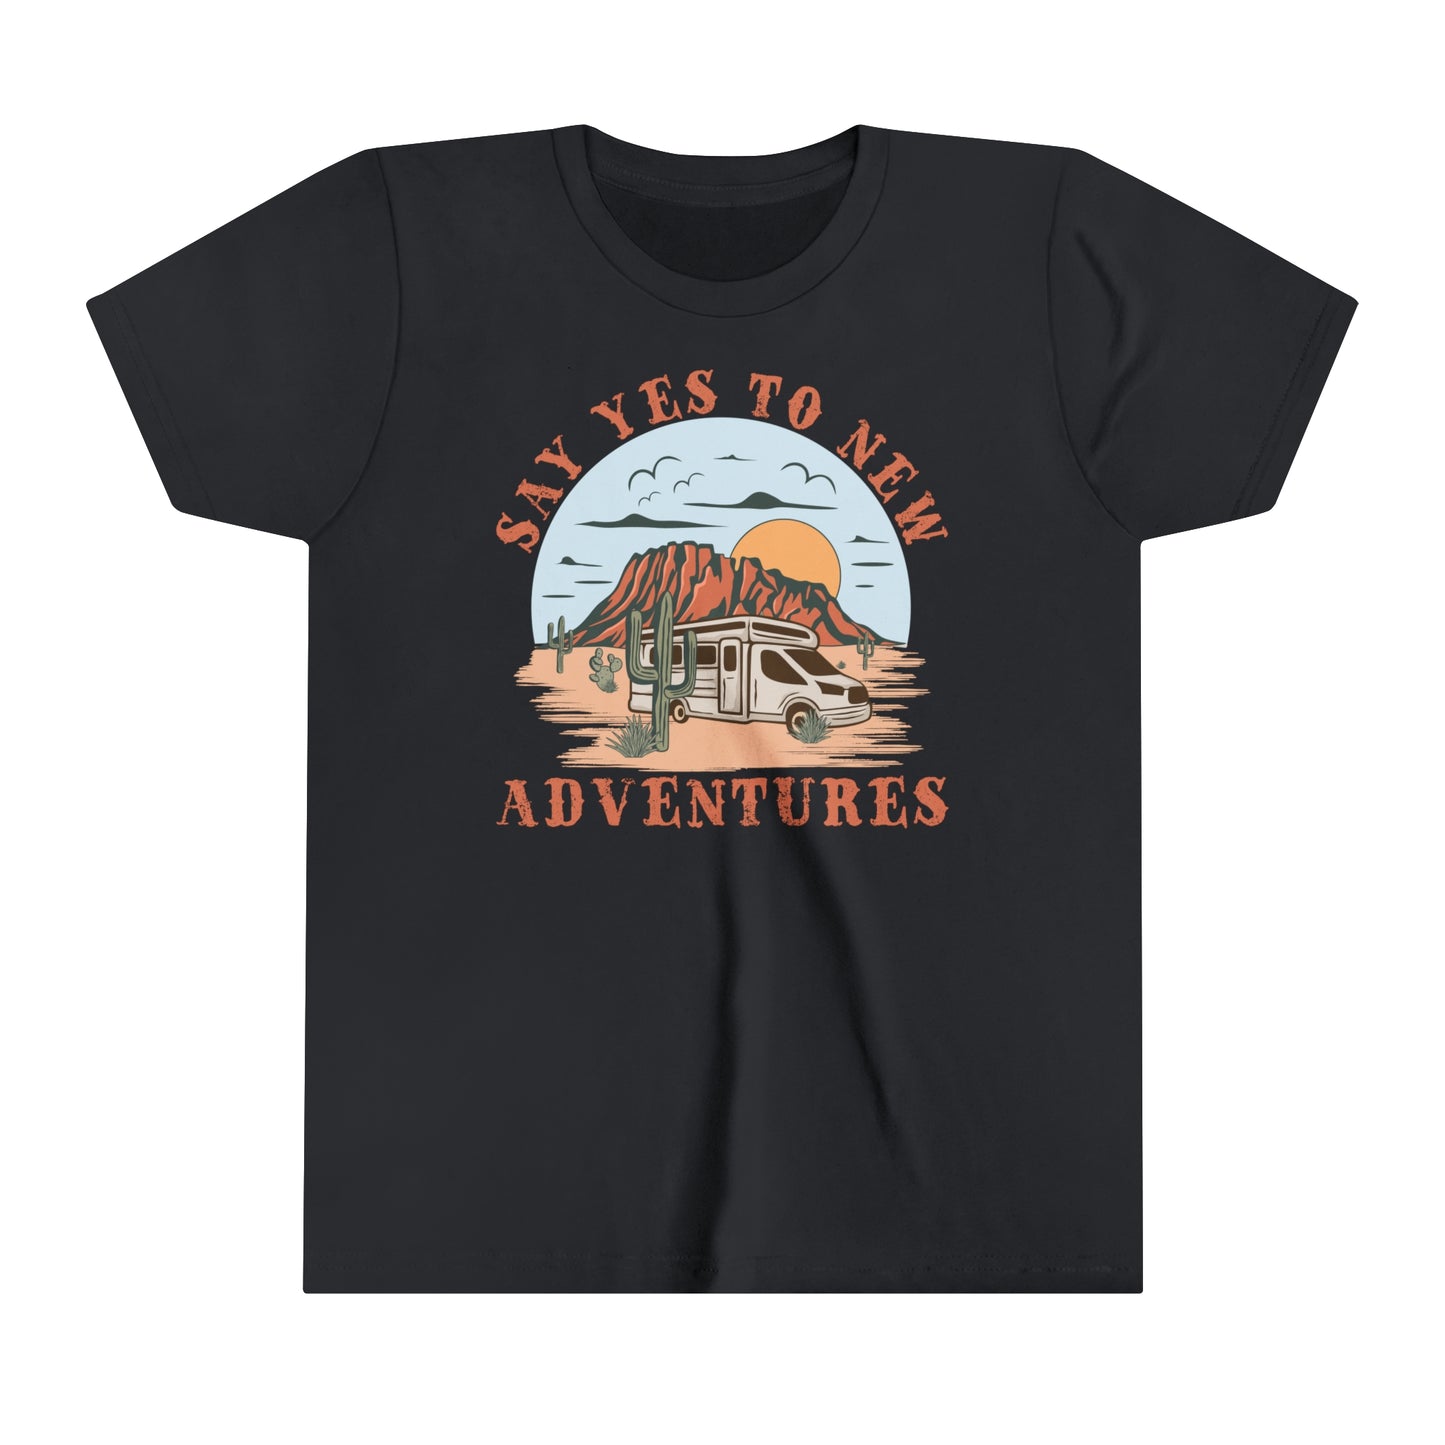 Say Yes To New Adventures | Youth Adventure T-Shirt | Retro Western Kid's Tee